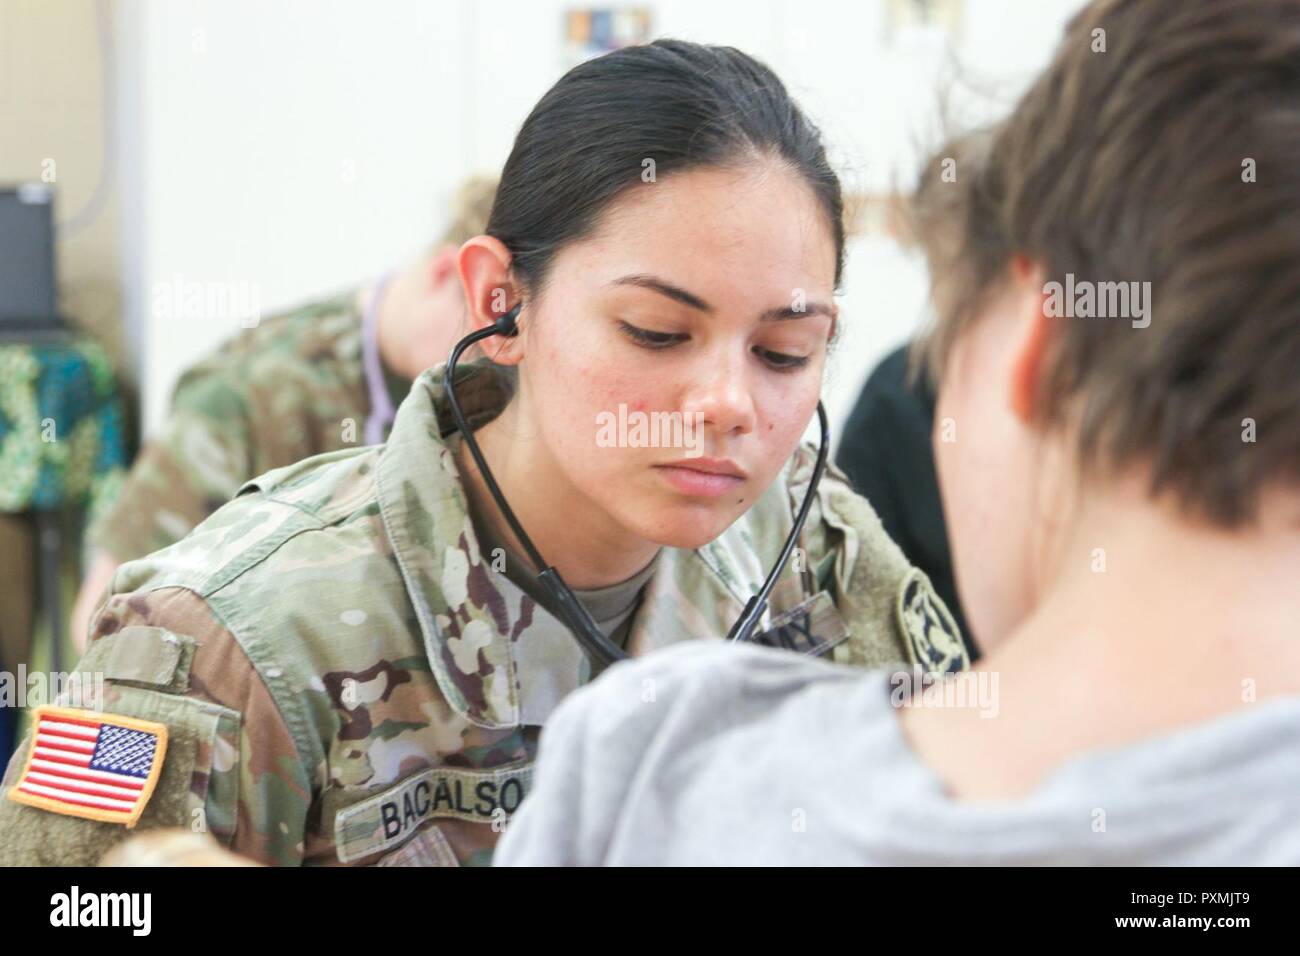 U.S. Army Reserve Pfc. Samantha Bacalso, a medic with the 48th Combat Support Hospital A Co. from Virginia Beach, Virginia checks the pulse of a member of the speical needs community June 16, 2017 on the Island of Kauai, Hawaii during Operation Tropic Care 2017. Tropic Care was a joint service operation that asissted in addressing the Kauai community healthcare needs at no cost while allowing the Army Reserve Soldiers to train on their mission-essential expeditionary tasks. Stock Photo